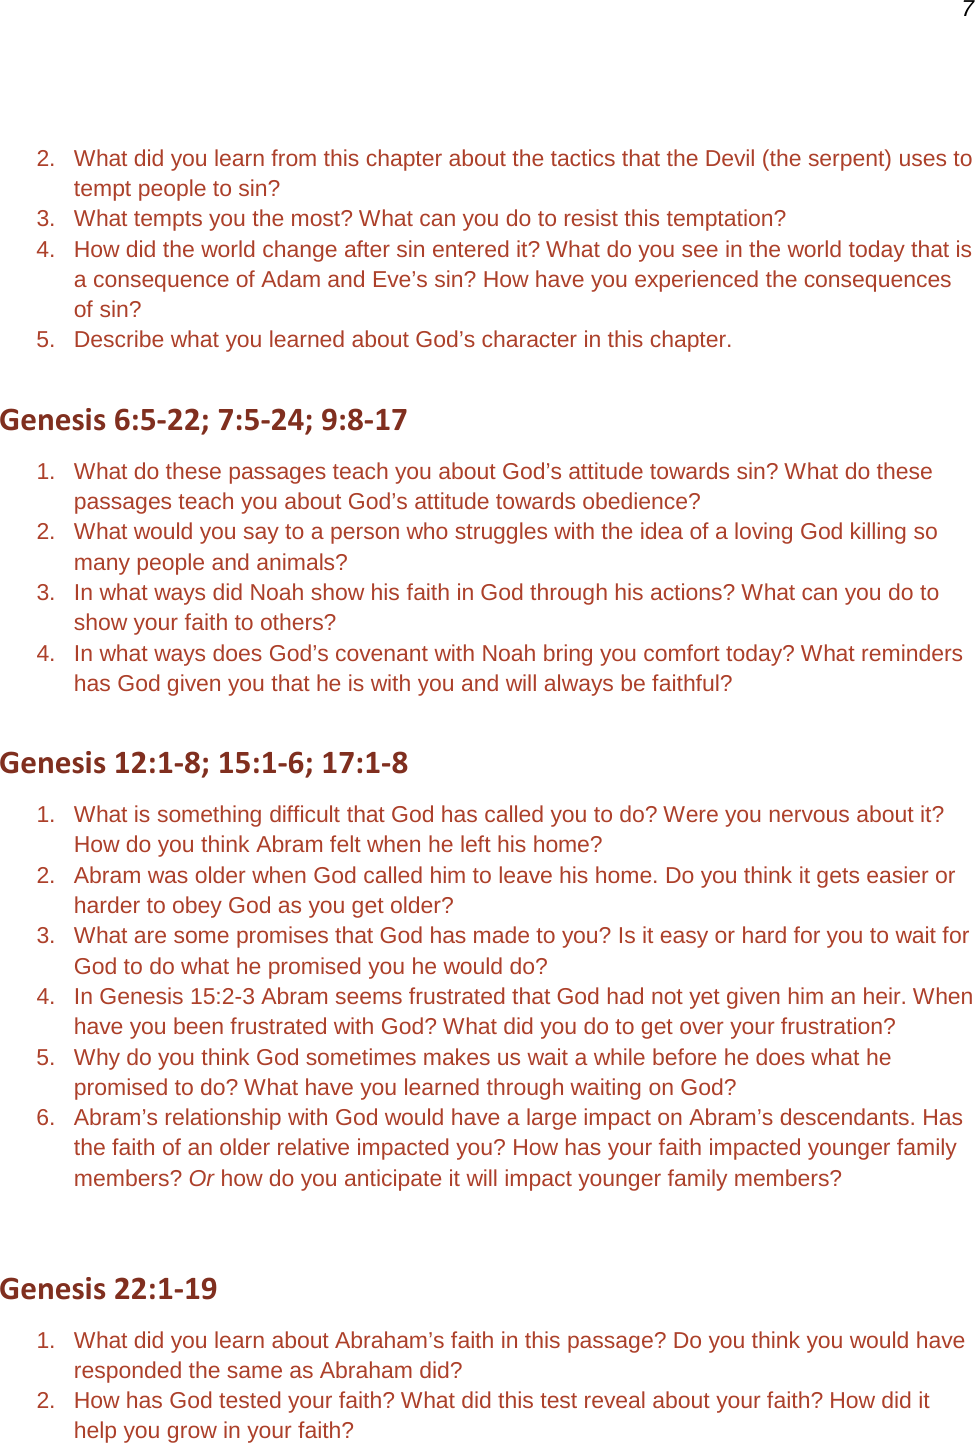 Page 7 of 9 - 4. Application Guide For Genesis